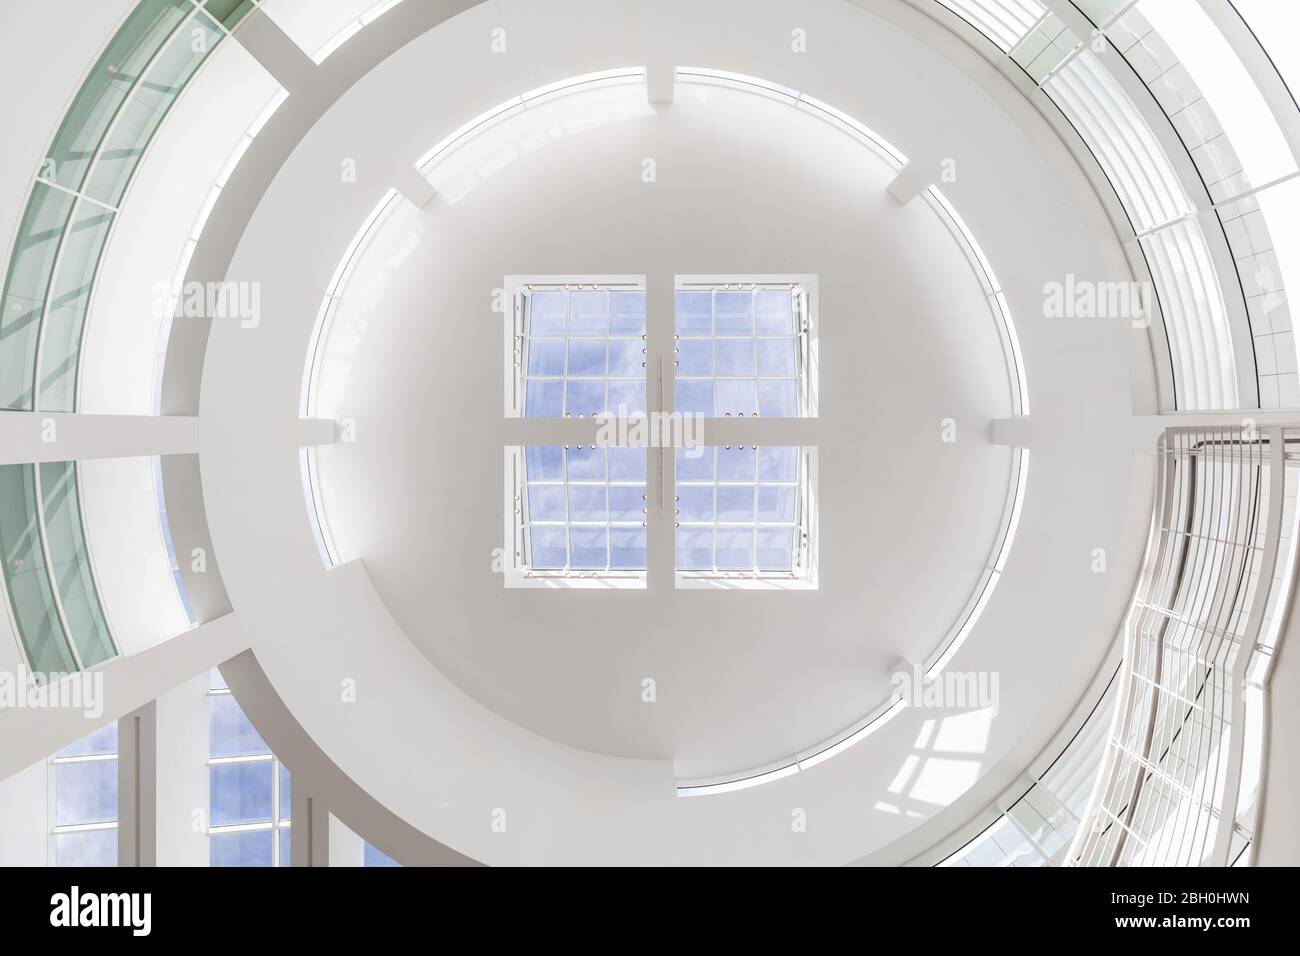 Geometrical close up of the skylight window in the Central Rotunda in the Getty Center museum Stock Photo